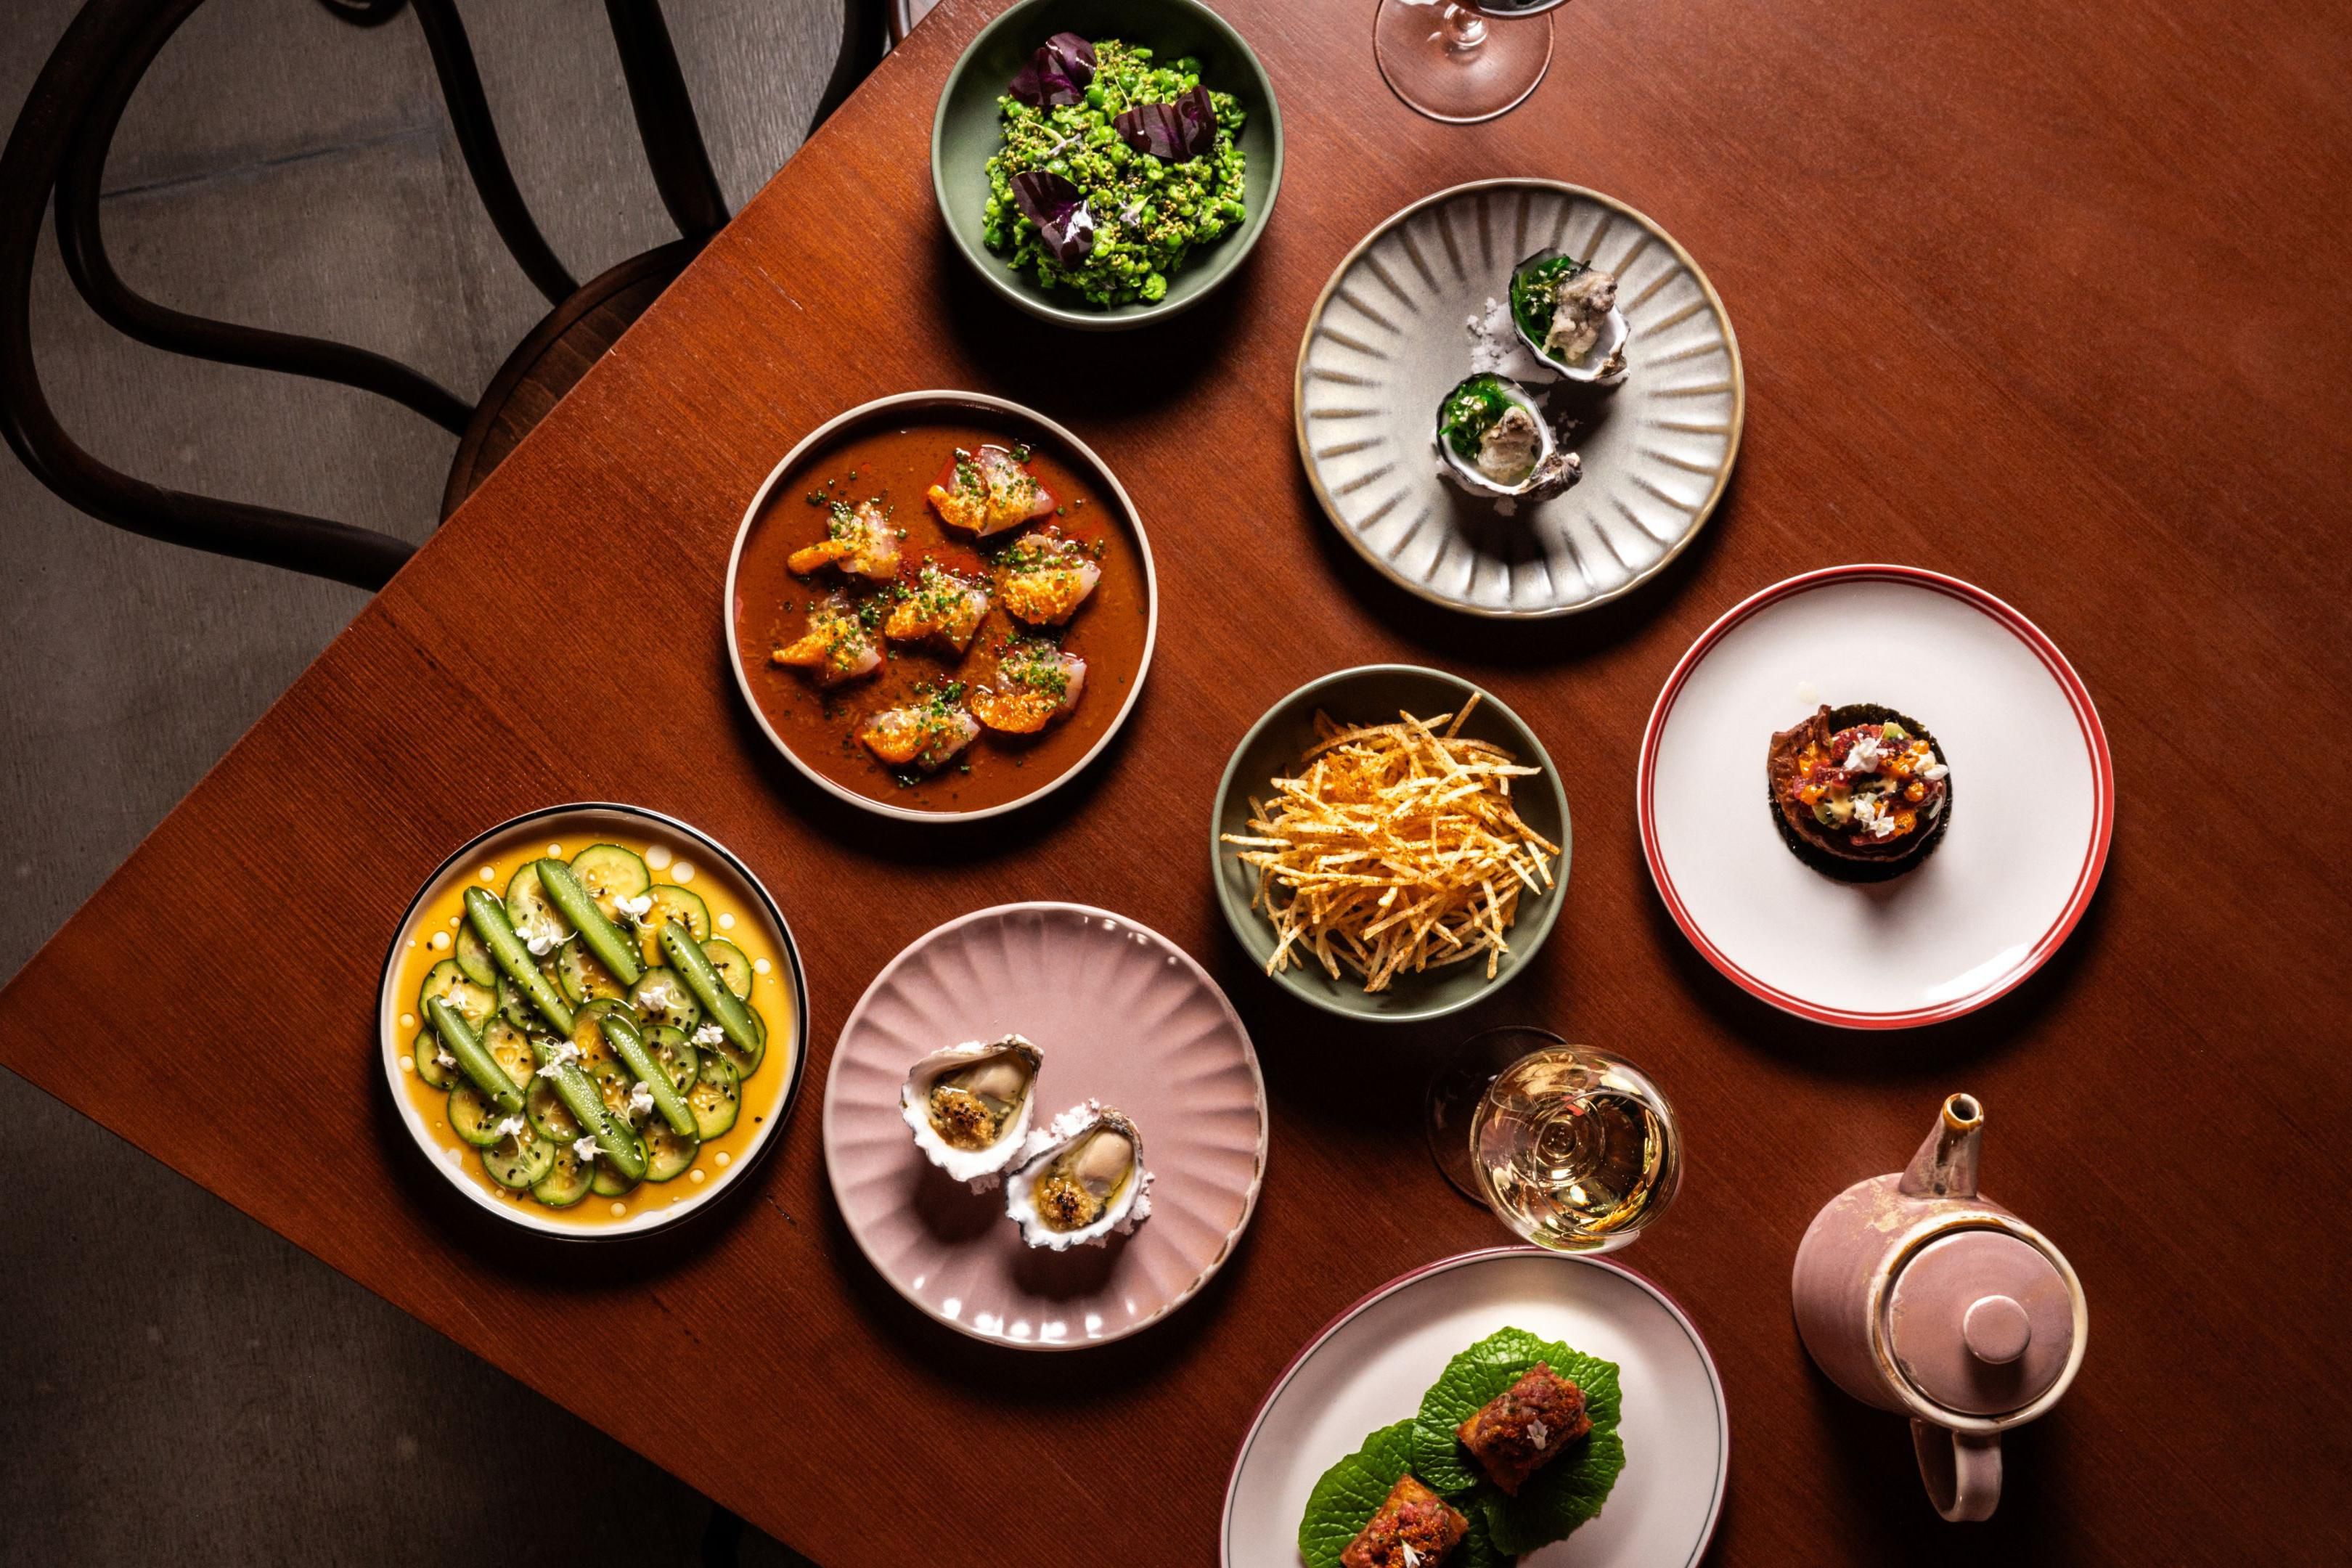 Tucked away off Penny’s Lane, Luc-San is a casual wine bar serving French and Japanese-inspired cuisine by Luke Mangan. Lose yourself in late nights and date nights, as conversations spill over Chablis and Sake.